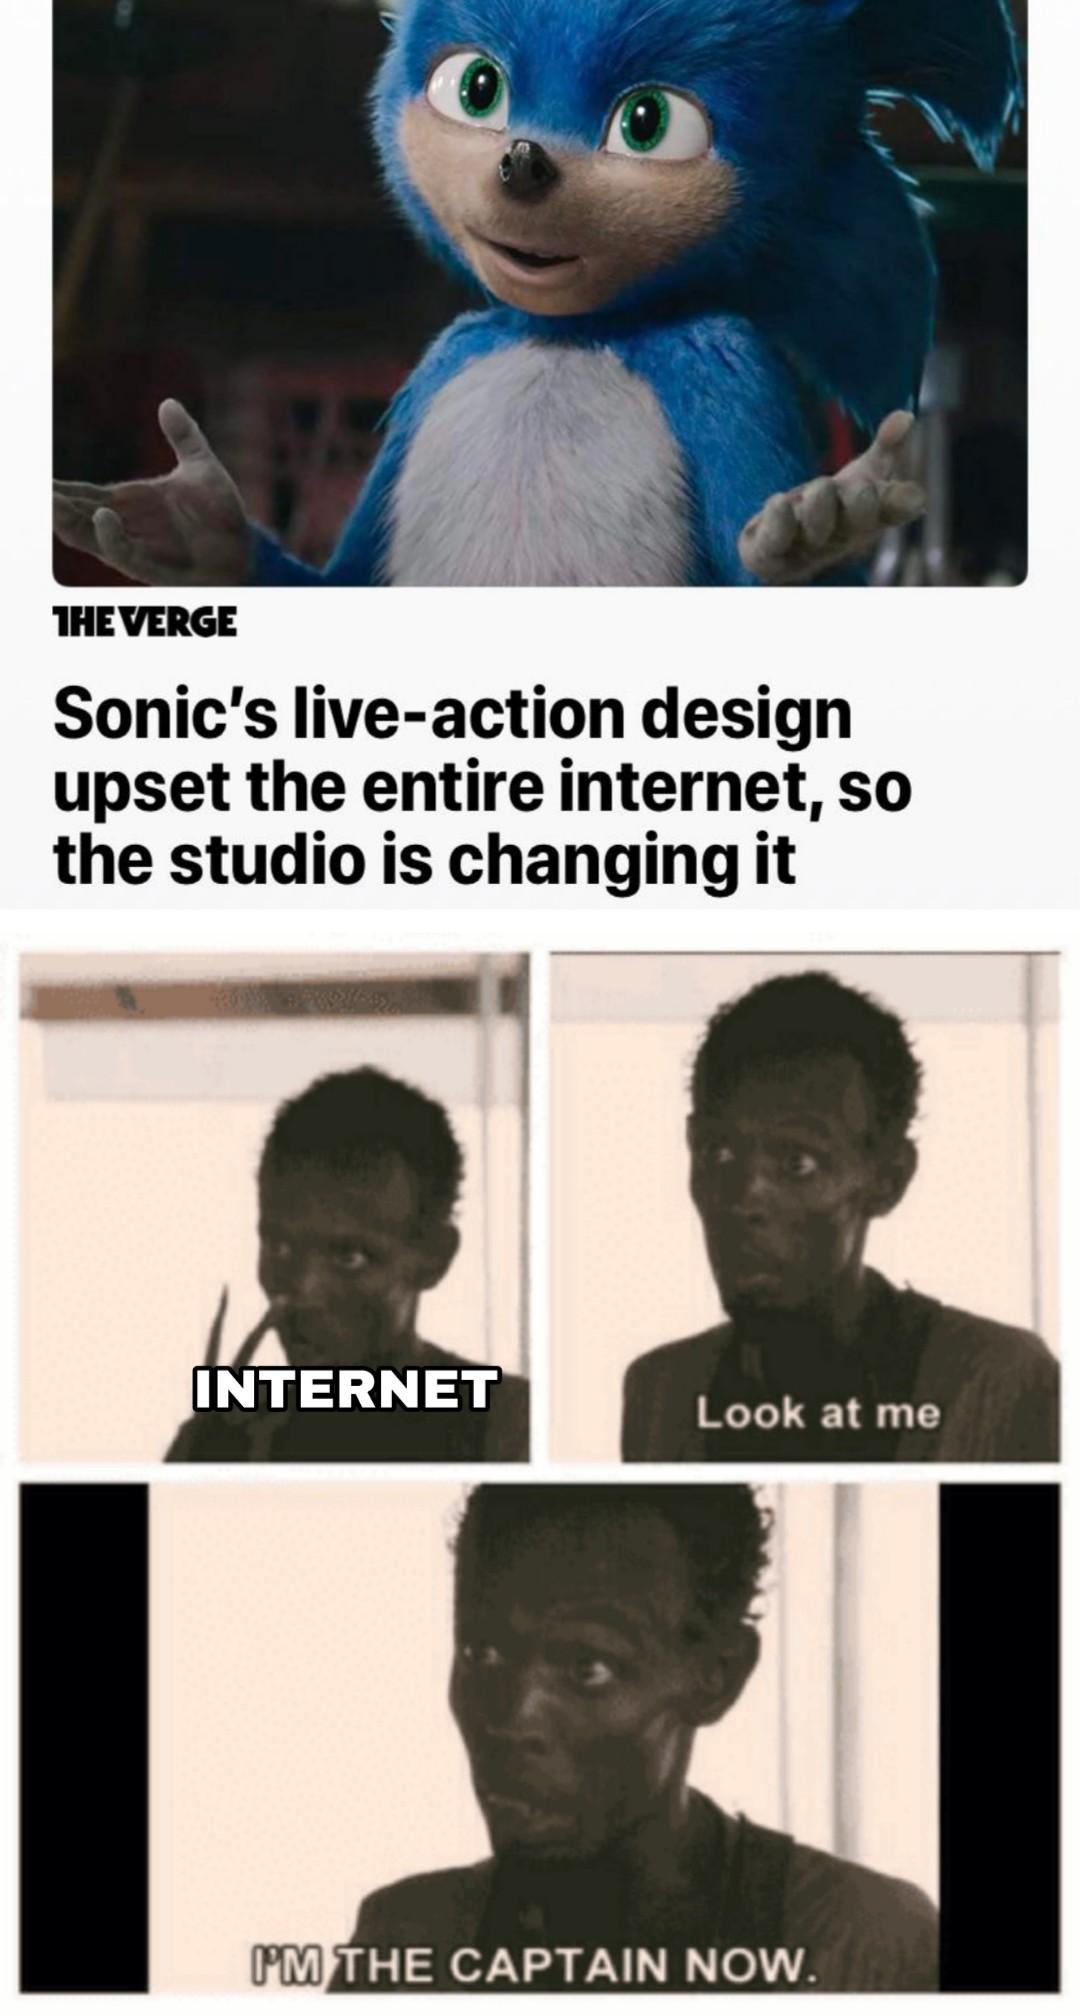 meme Sonic Movie Redesign memes - look at me im the captain now - The Verge Sonic's liveaction design upset the entire internet, so the studio is changing it Internet Look at me Pm The Captain Now.